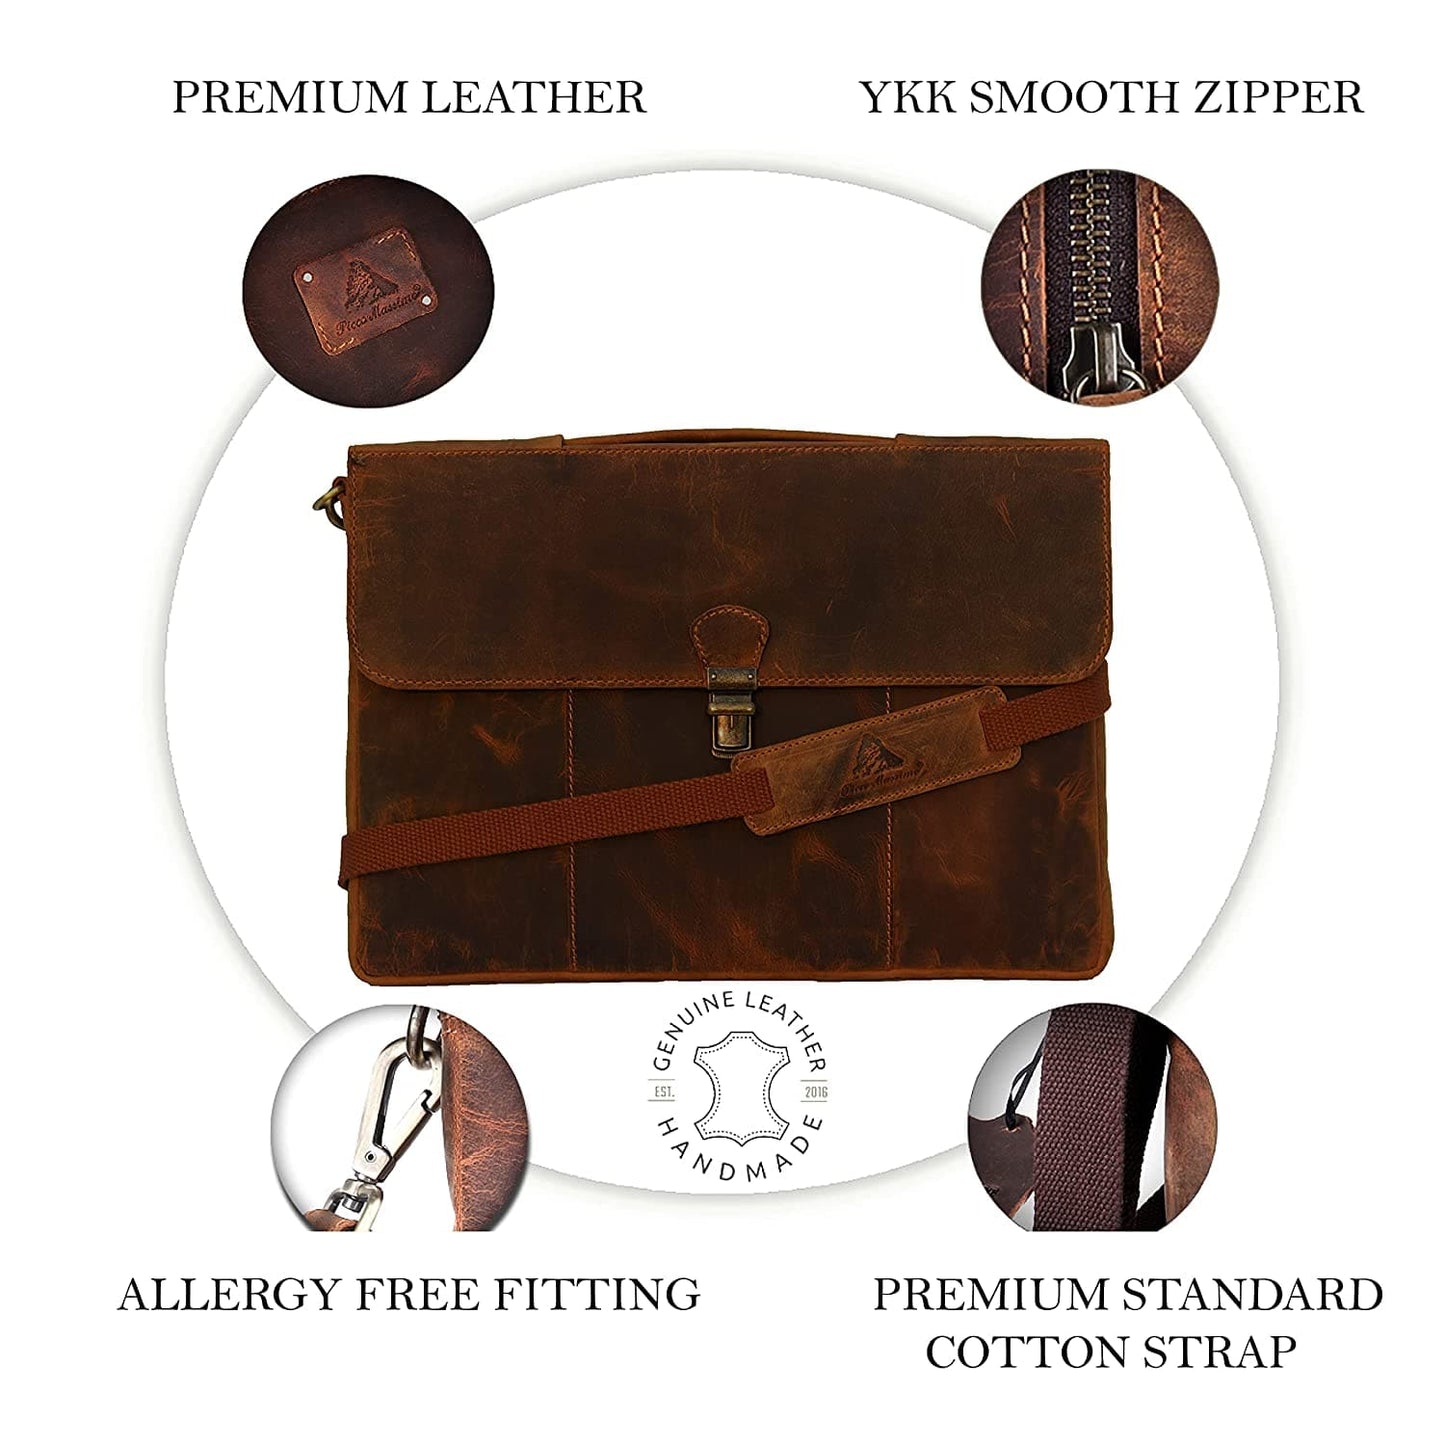 Laptop bag Well-organized and are Convenient to Carry Compatible with 14-inch Laptop Detachable and Adjustable Shoulder Strap